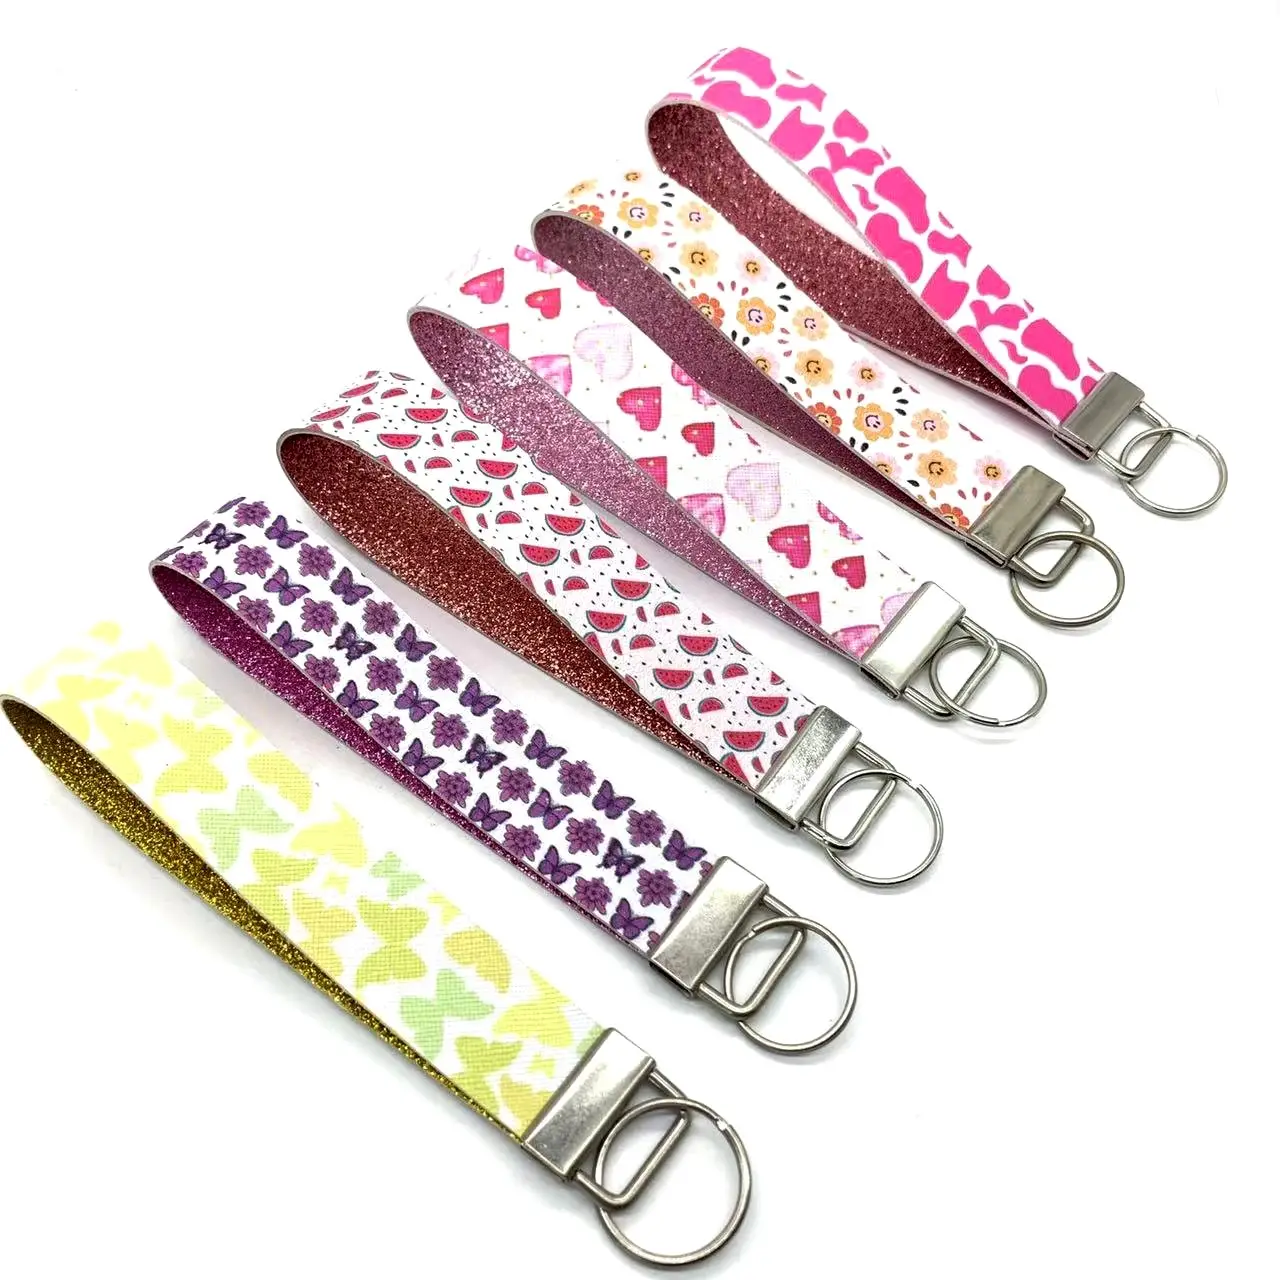 Customized Women Self Defense Keychain Accessories Protective PU Leather Key Chain Strap Safety Wristlet Keychain Supplier